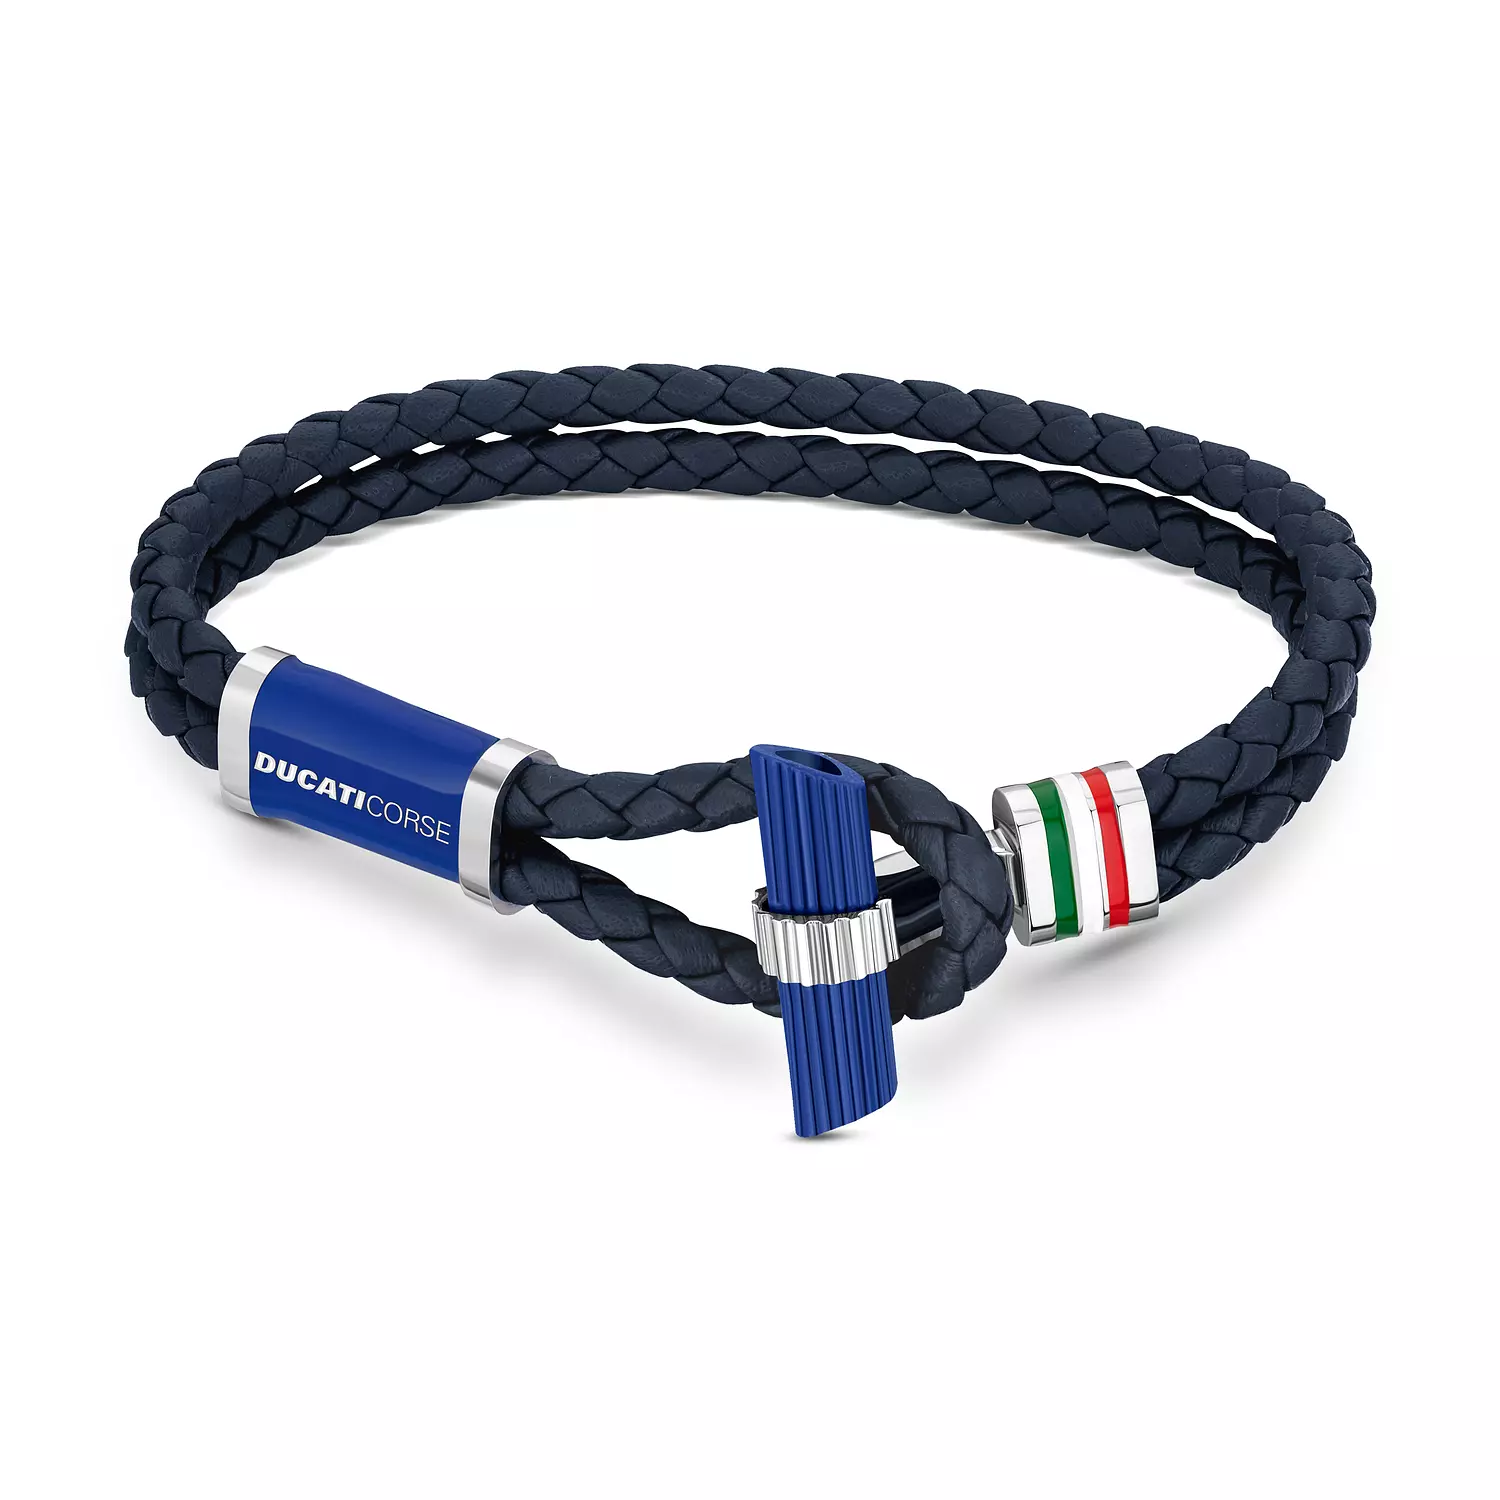 Ducati - DTAGB2136809 - COLLEZIONE T NAVY LEATHER WITH Stainless Steel BRACELET LARGE hover image